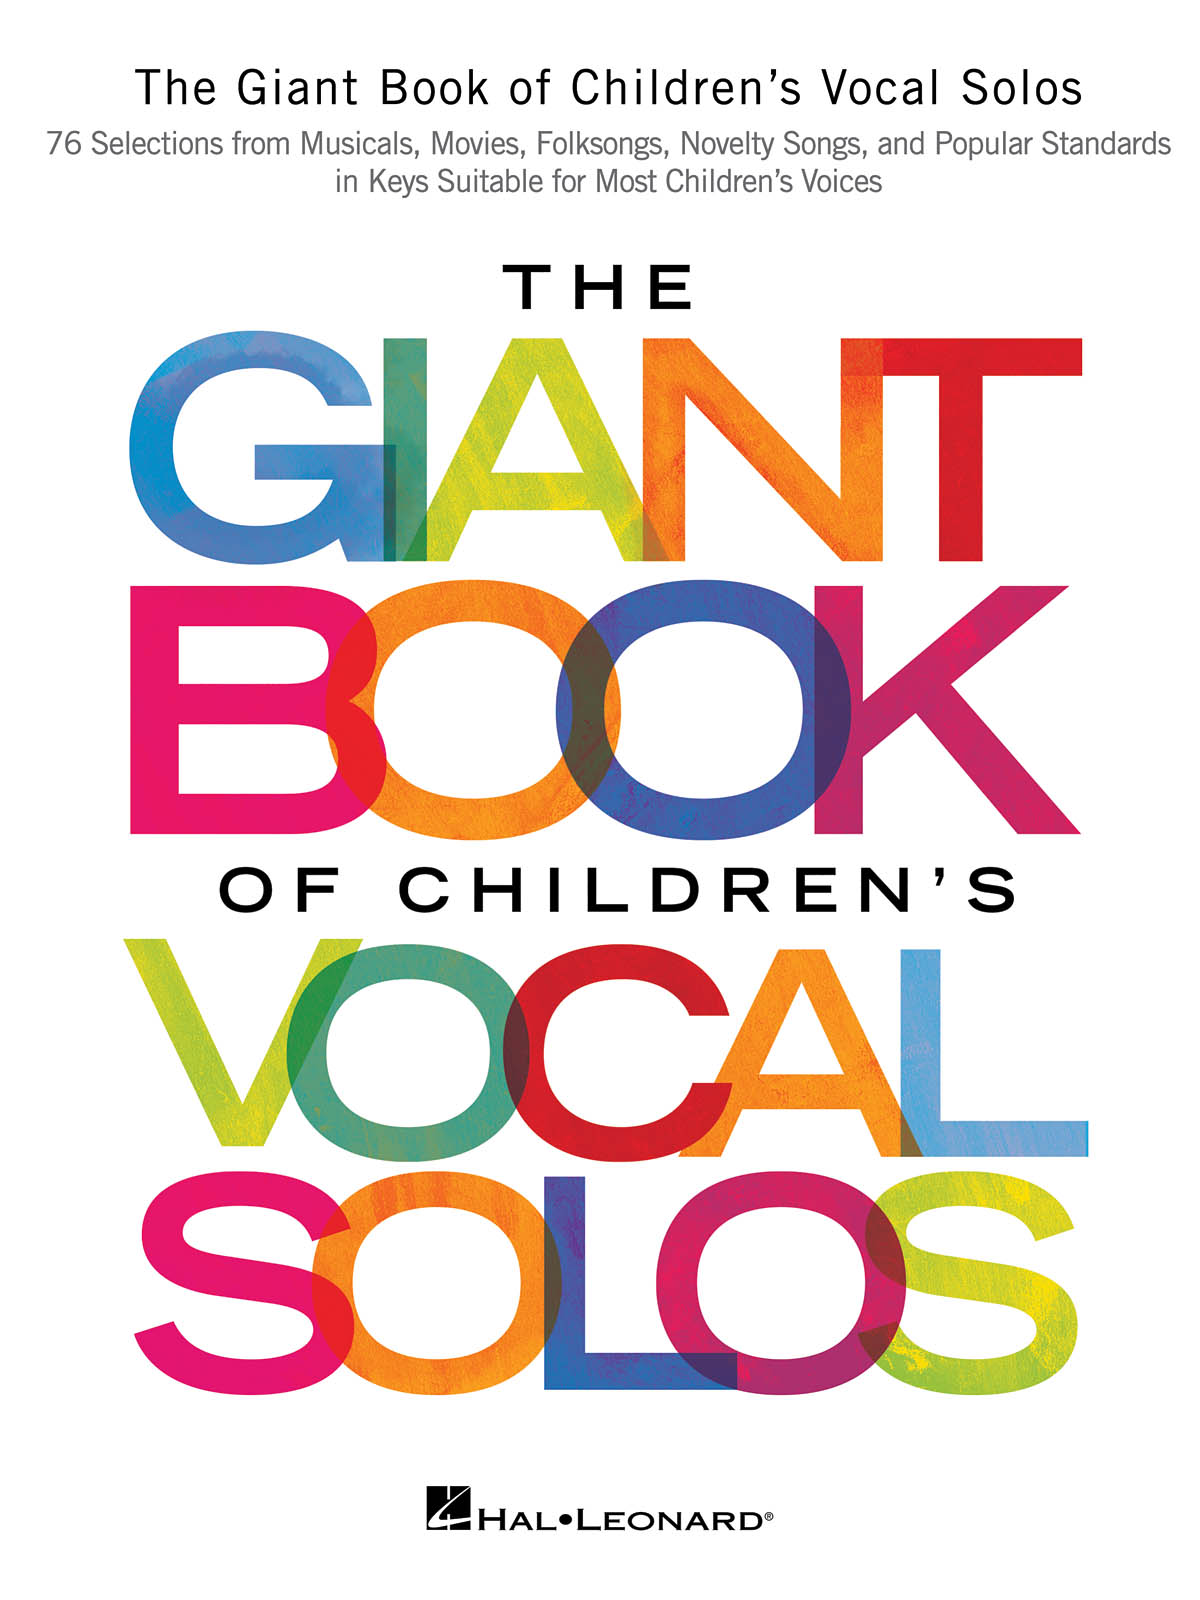 The Giant Book of Children's Vocal Solos - 76 Selections